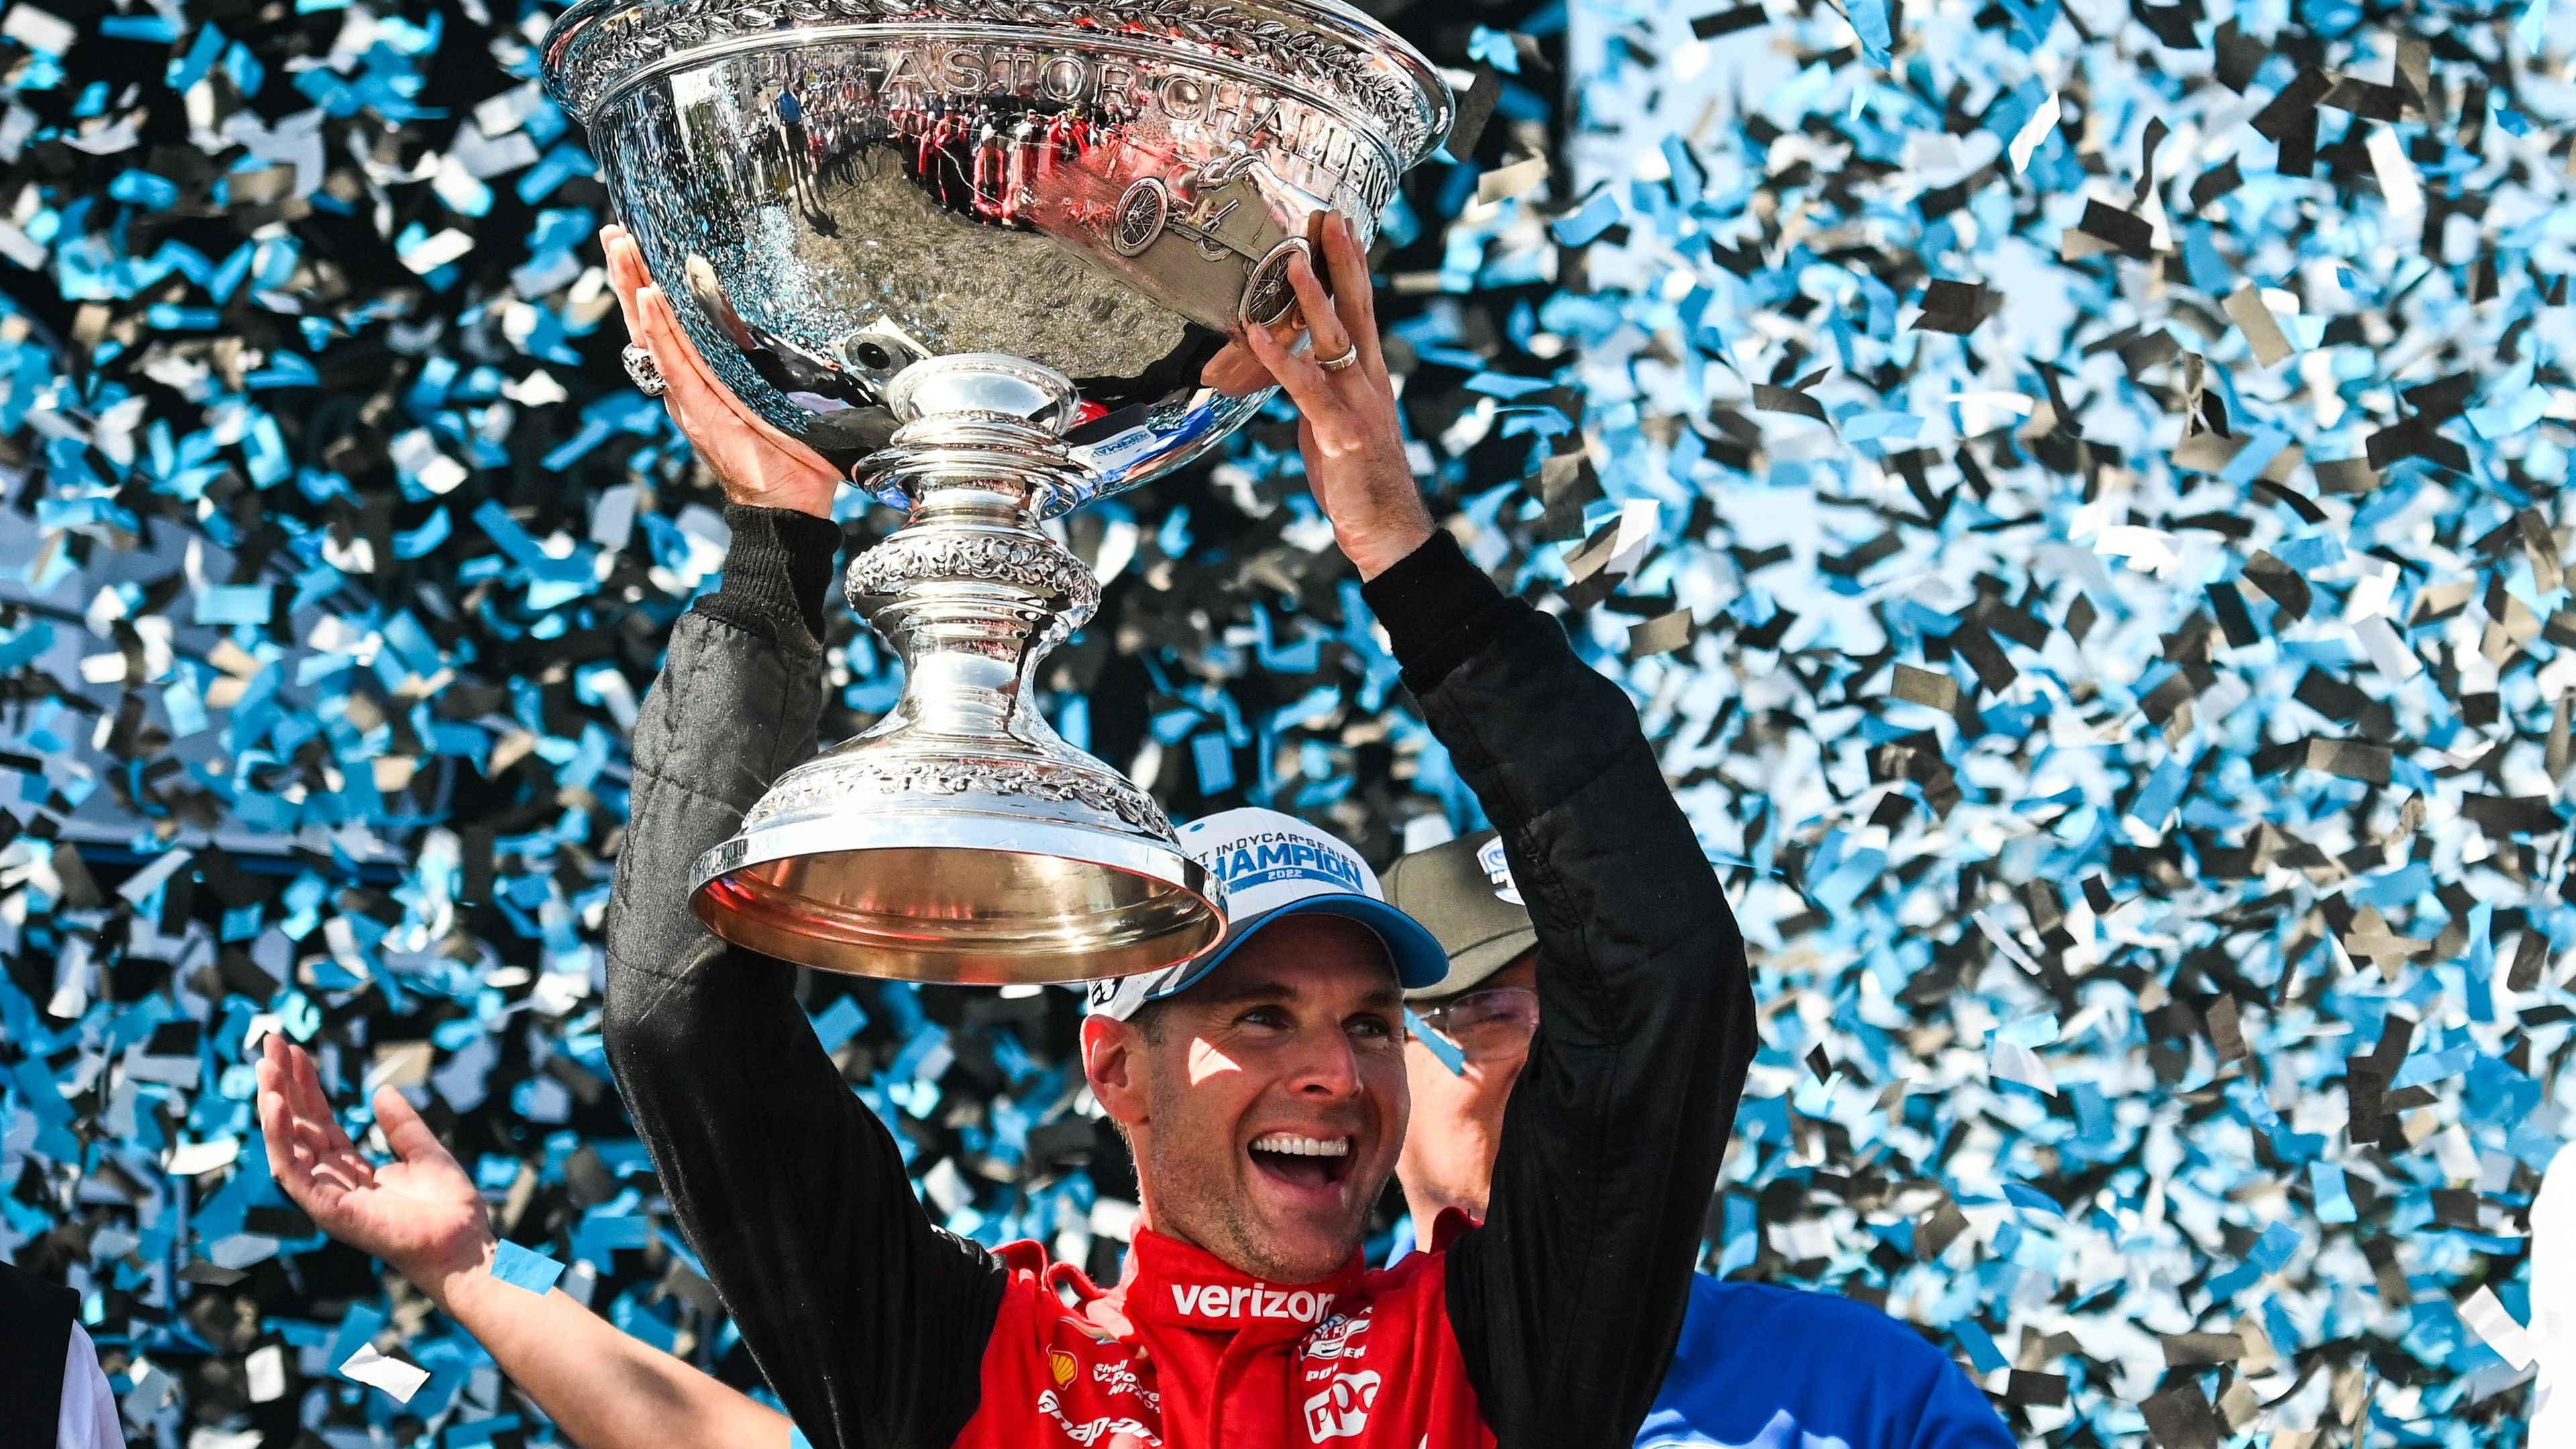 Will Power 'mentally drained' after 'story of our year' fairytale finish to IndyCar title chase